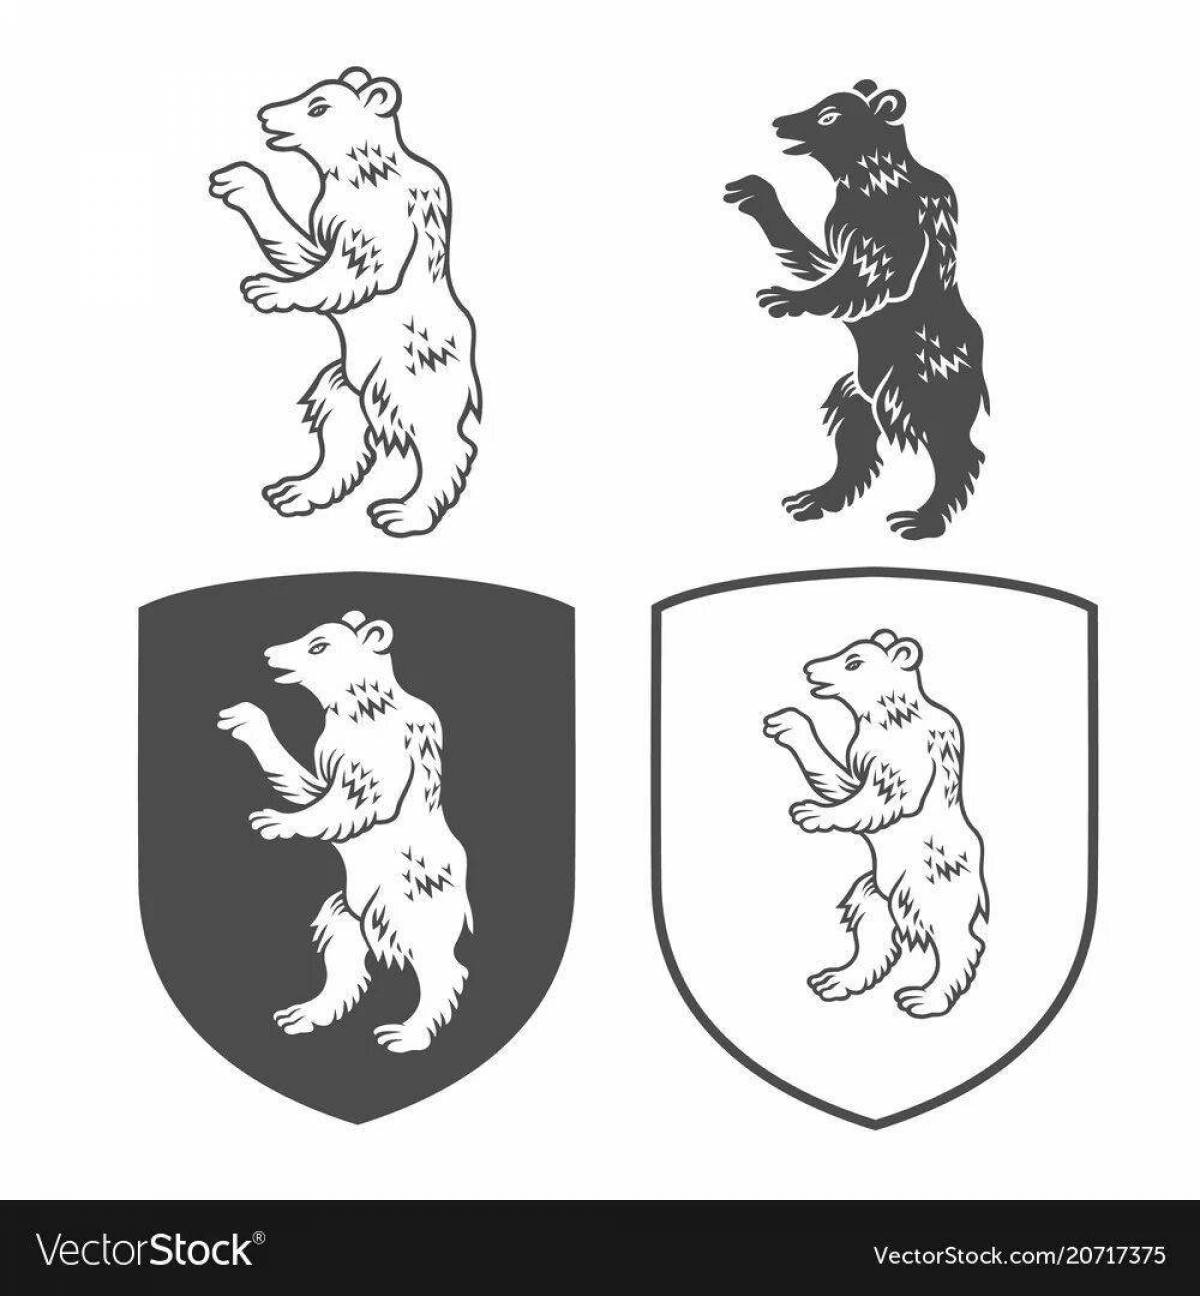 Large coat of arms of Yaroslavl for kids